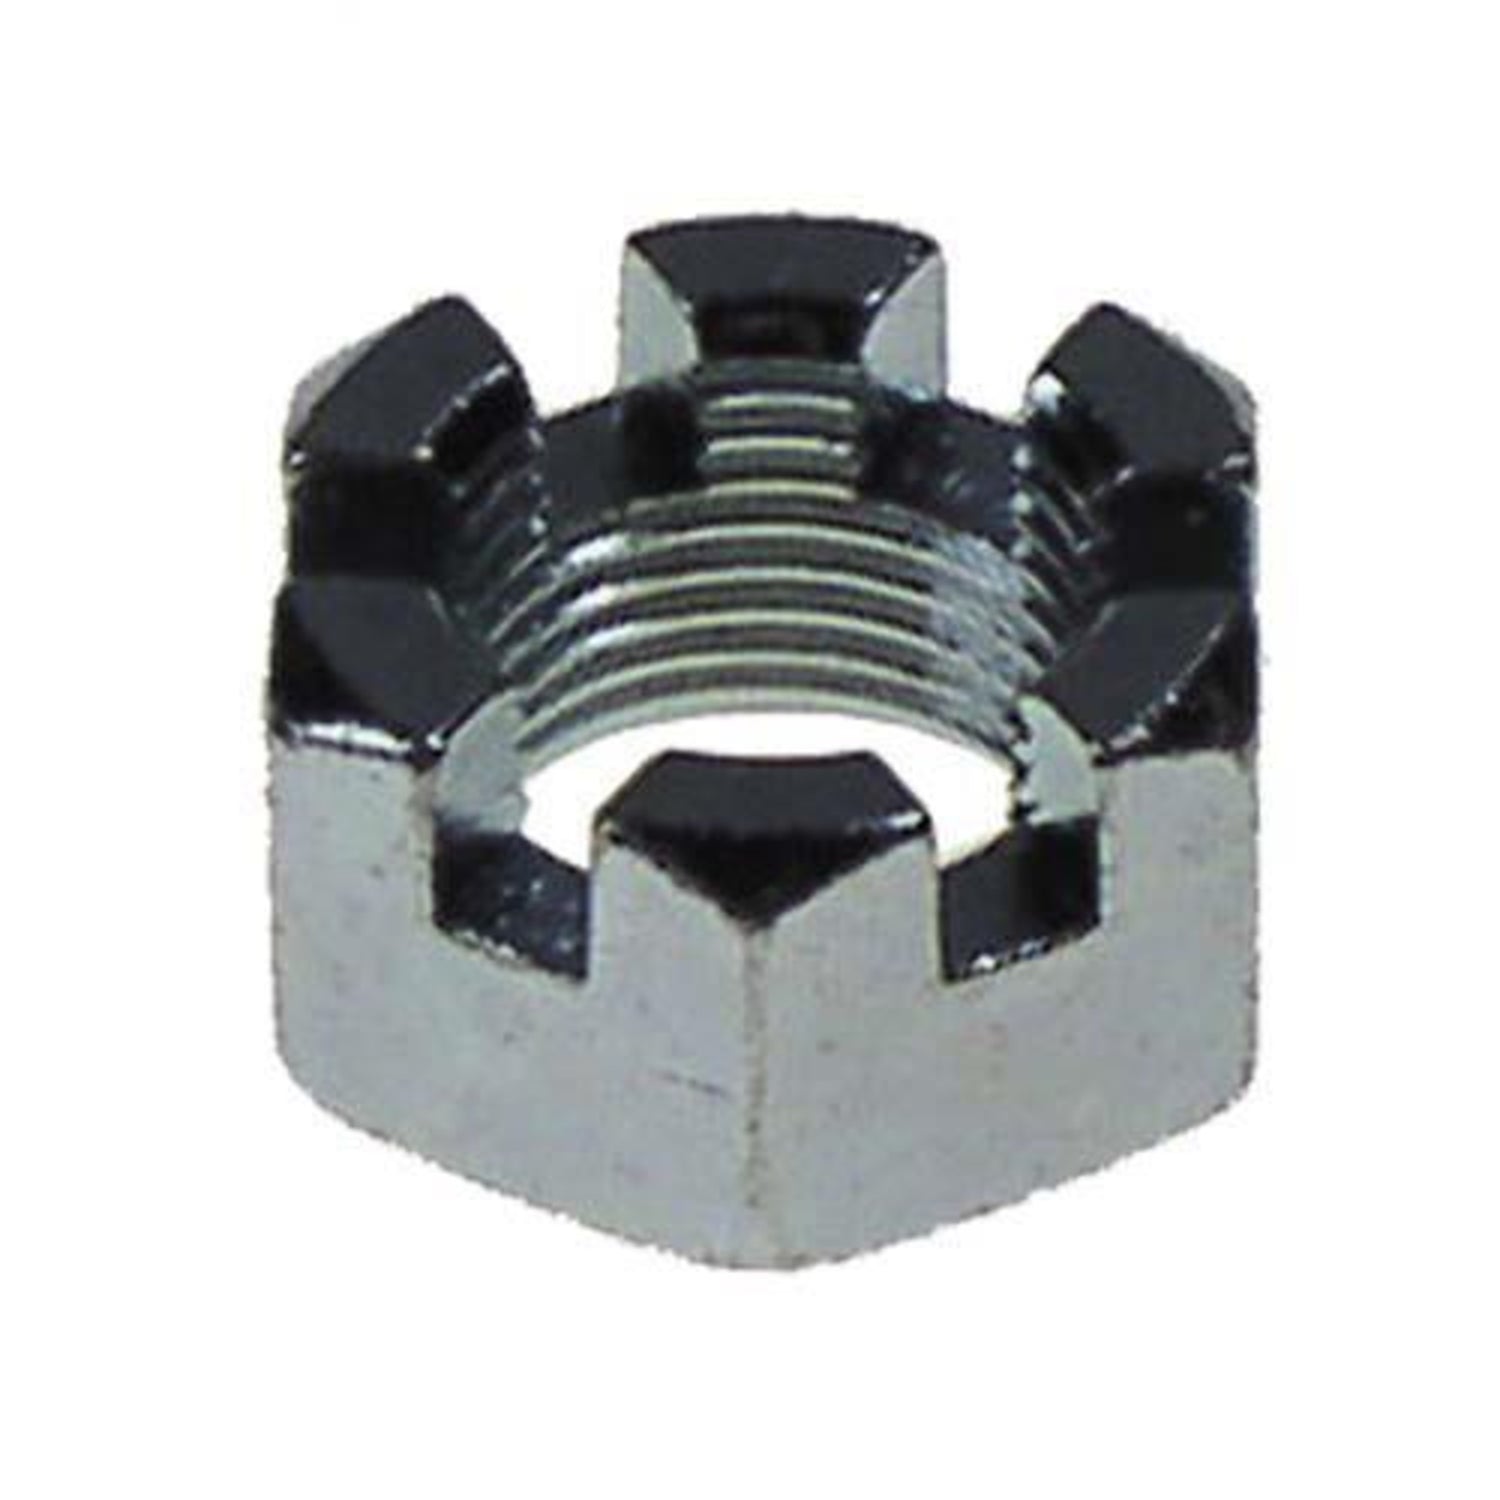 E-Z-GO Gas 4-Cycle Axle Nut (Years 1991-Up)